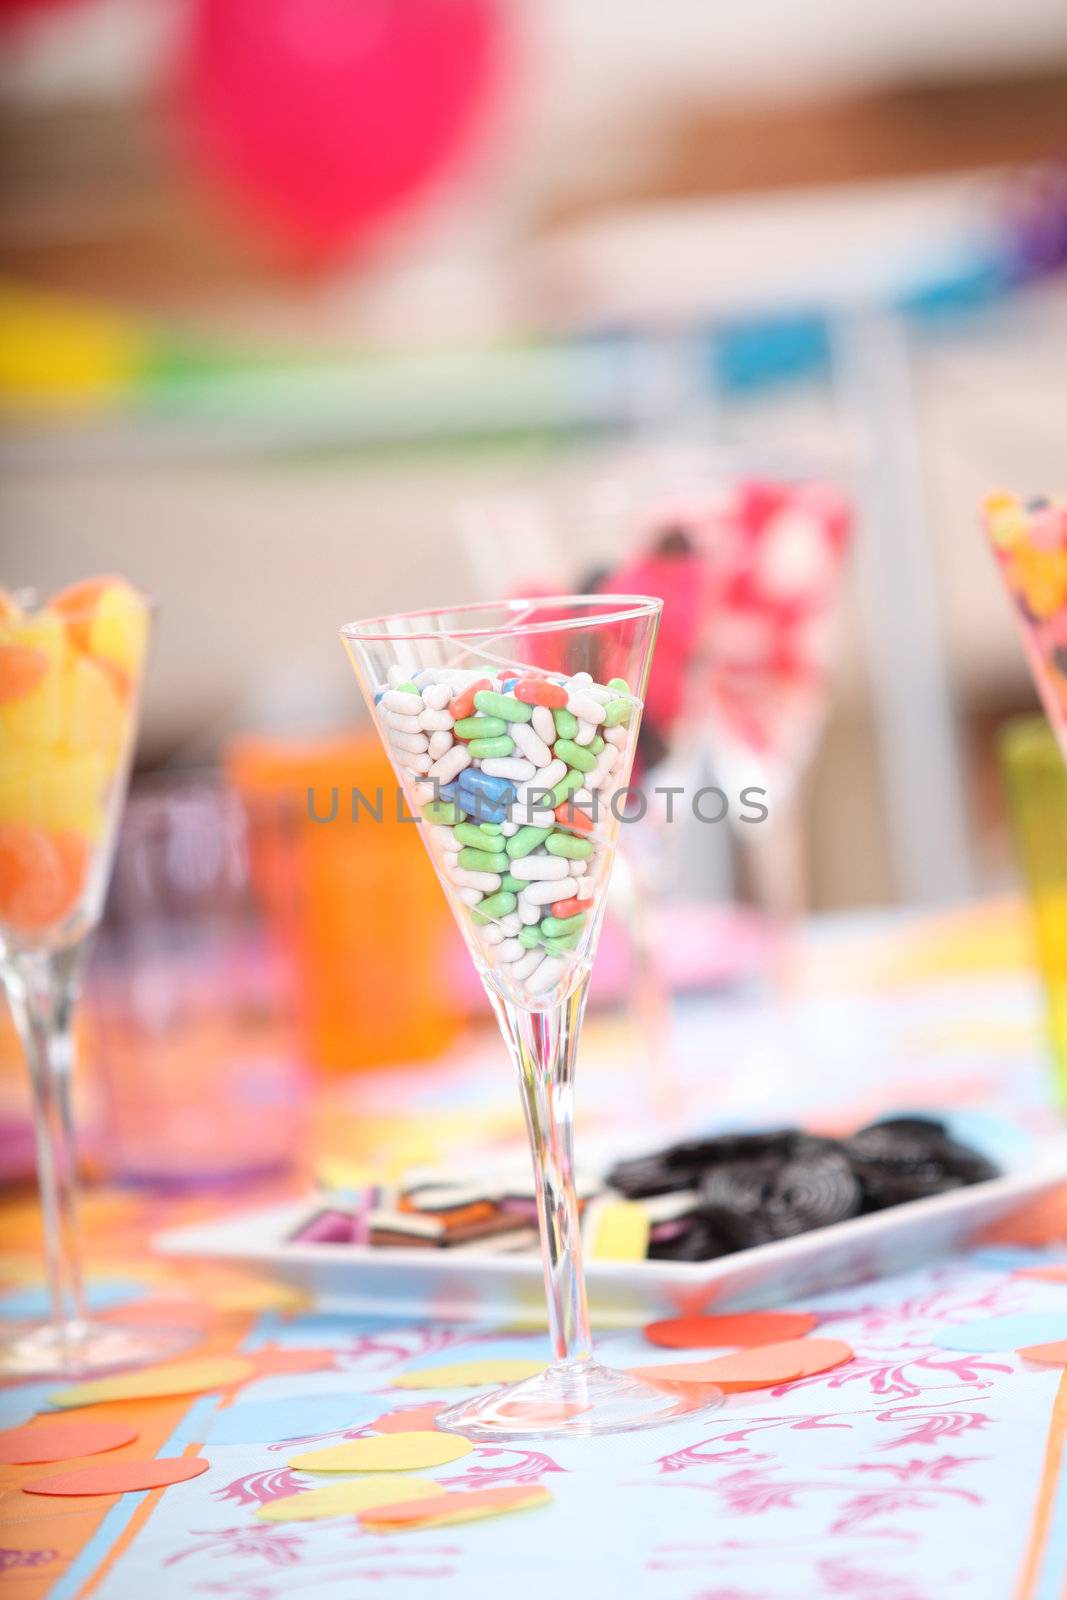 Glasses of sweets at a child's birthday party